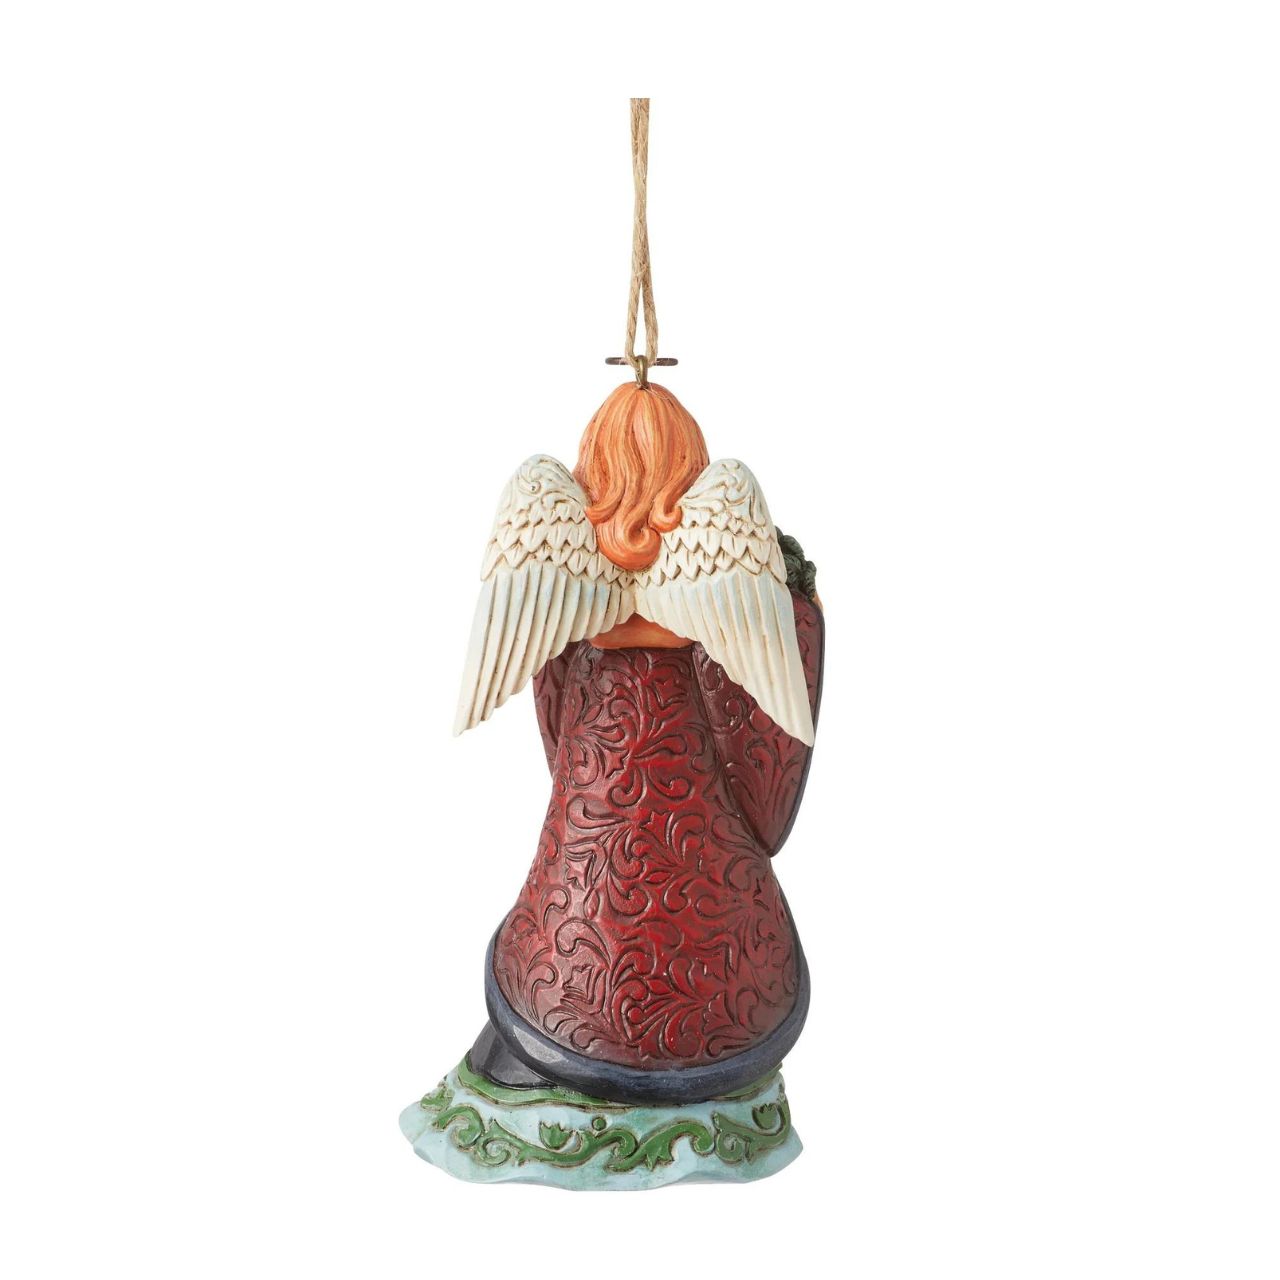 Heartwood Creek Holiday Manor Christmas Angel with Wreath Hanging Ornament  Designed by award winning artist Jim Shore as part of the Heartwood Creek Holiday Manor Collection, hand crafted using high quality cast stone and hand painted, this festive Angel with wreath hanging ornament is perfect for the Christmas season.